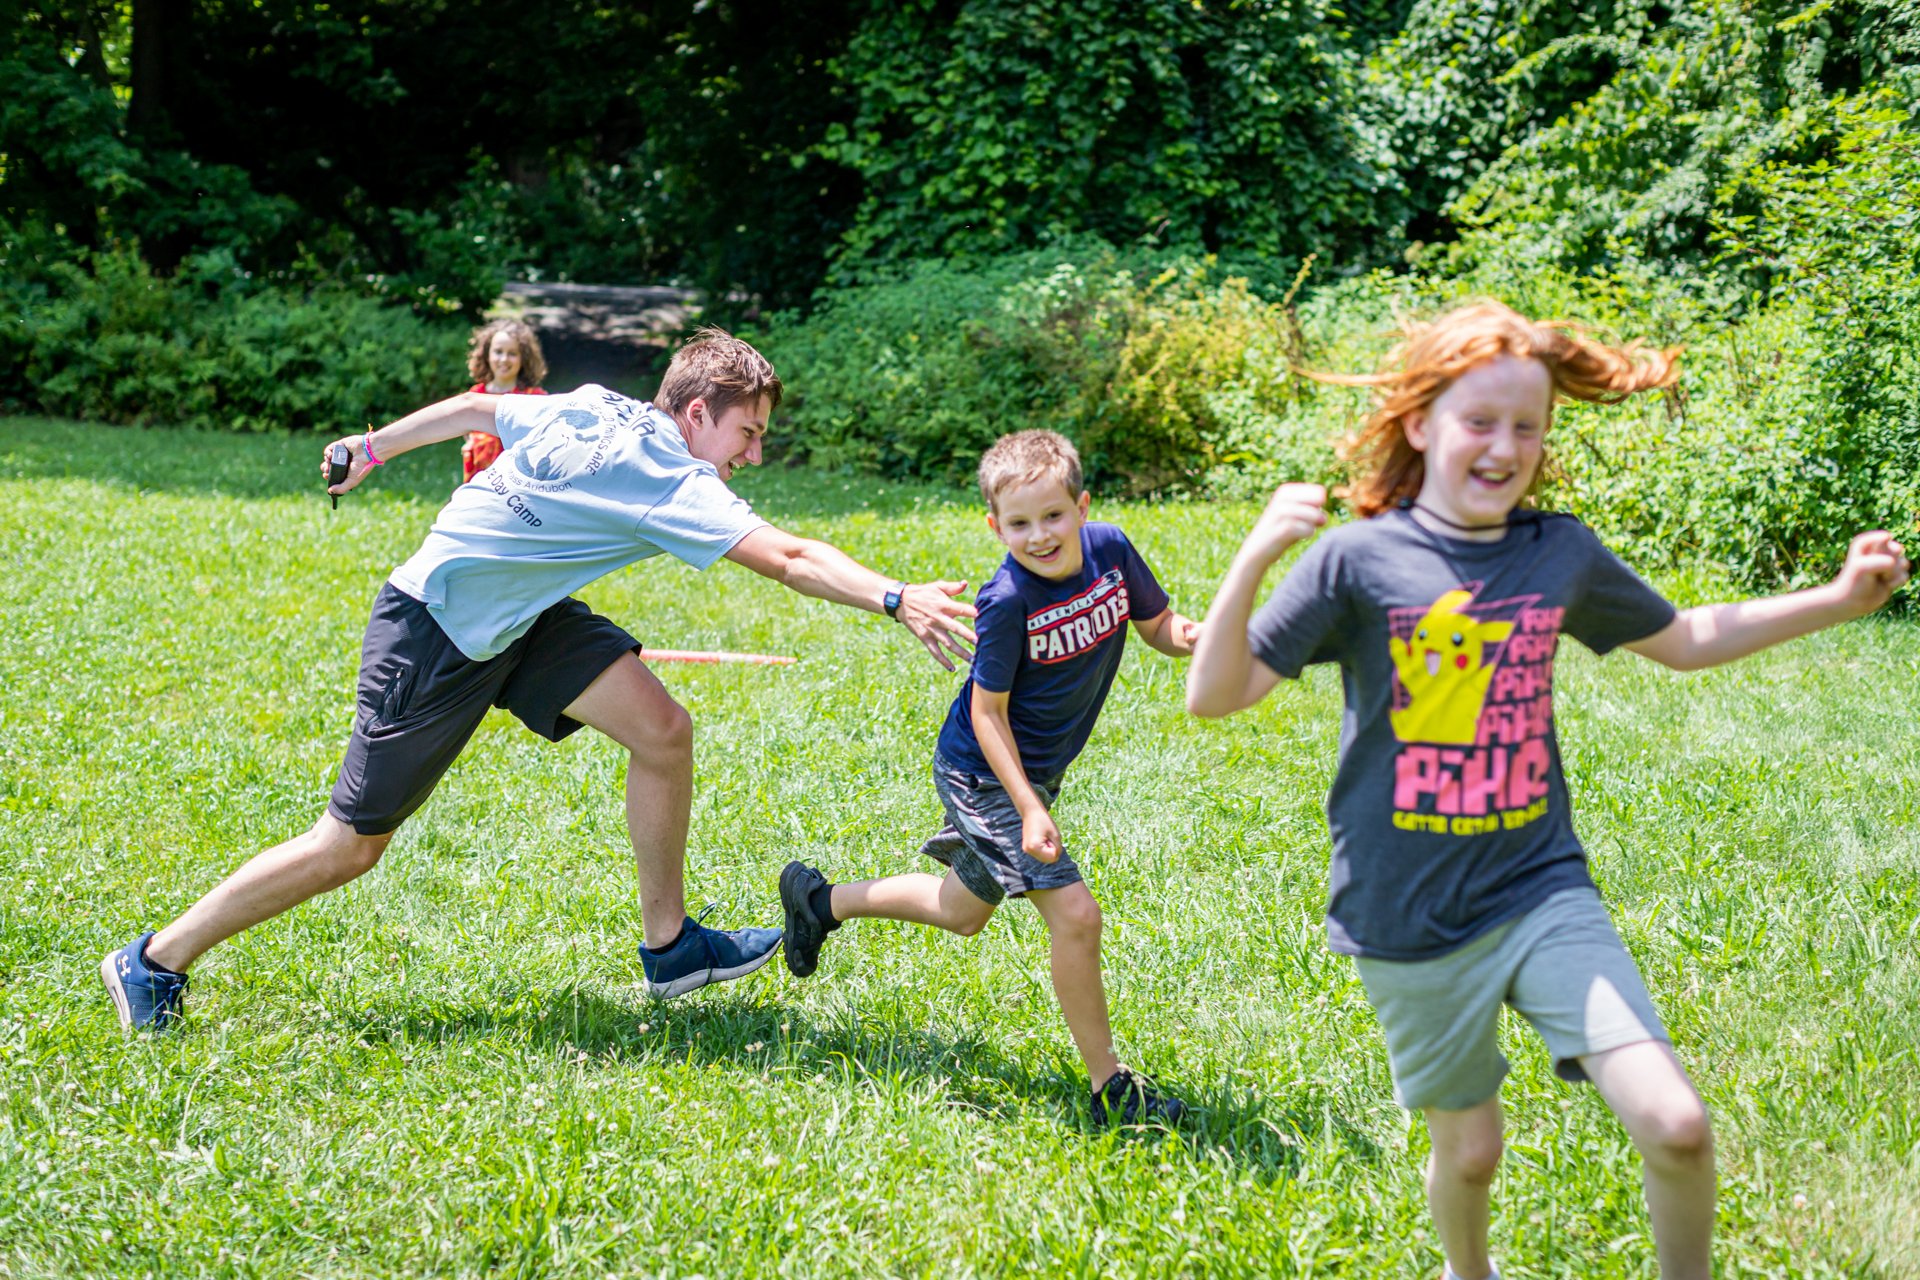 Smiling campers at Arcadia Nature Camp play tag in the grass with a counselor holding a radio